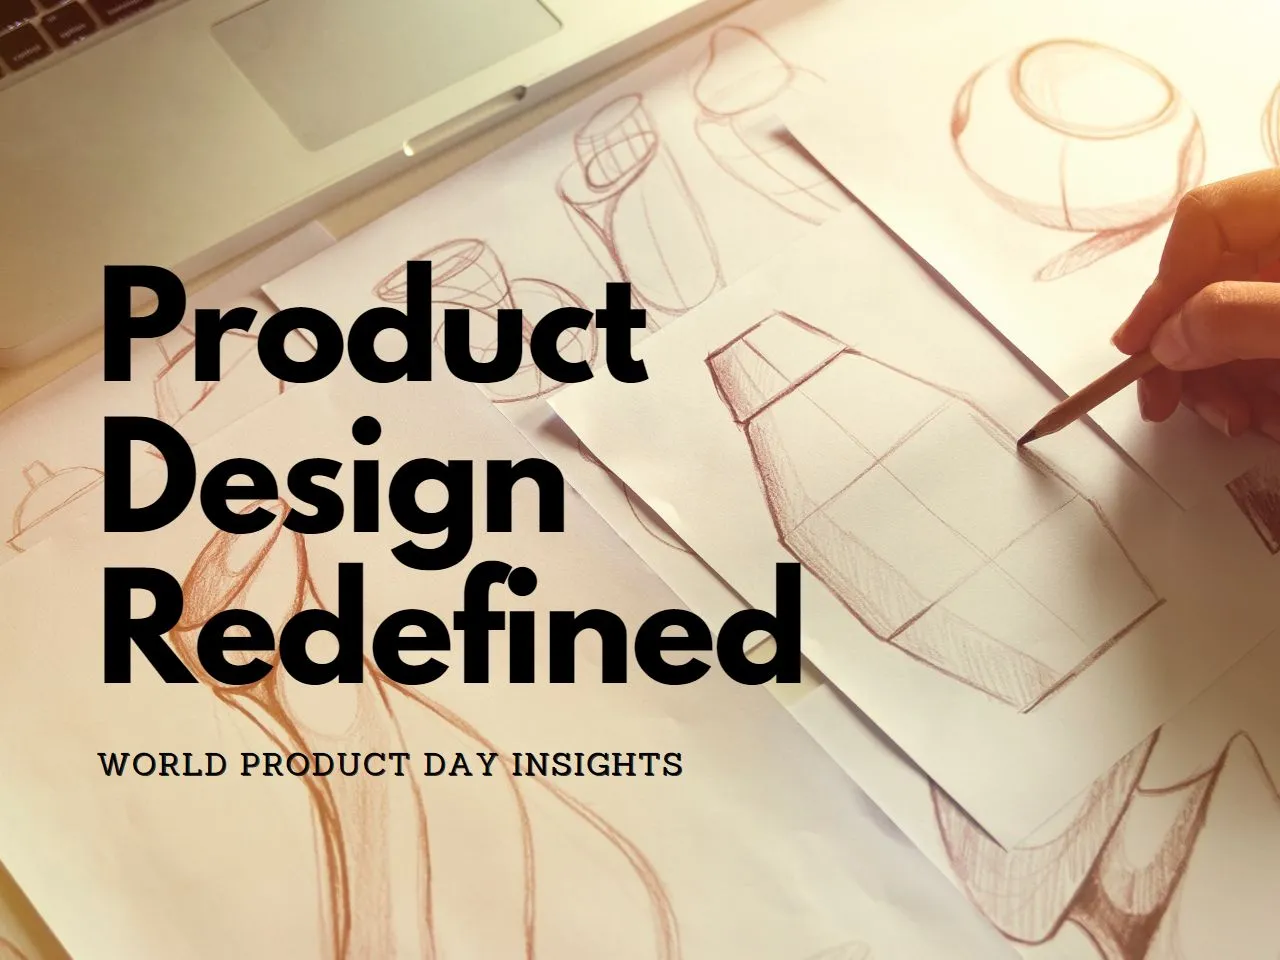 World Product Day 